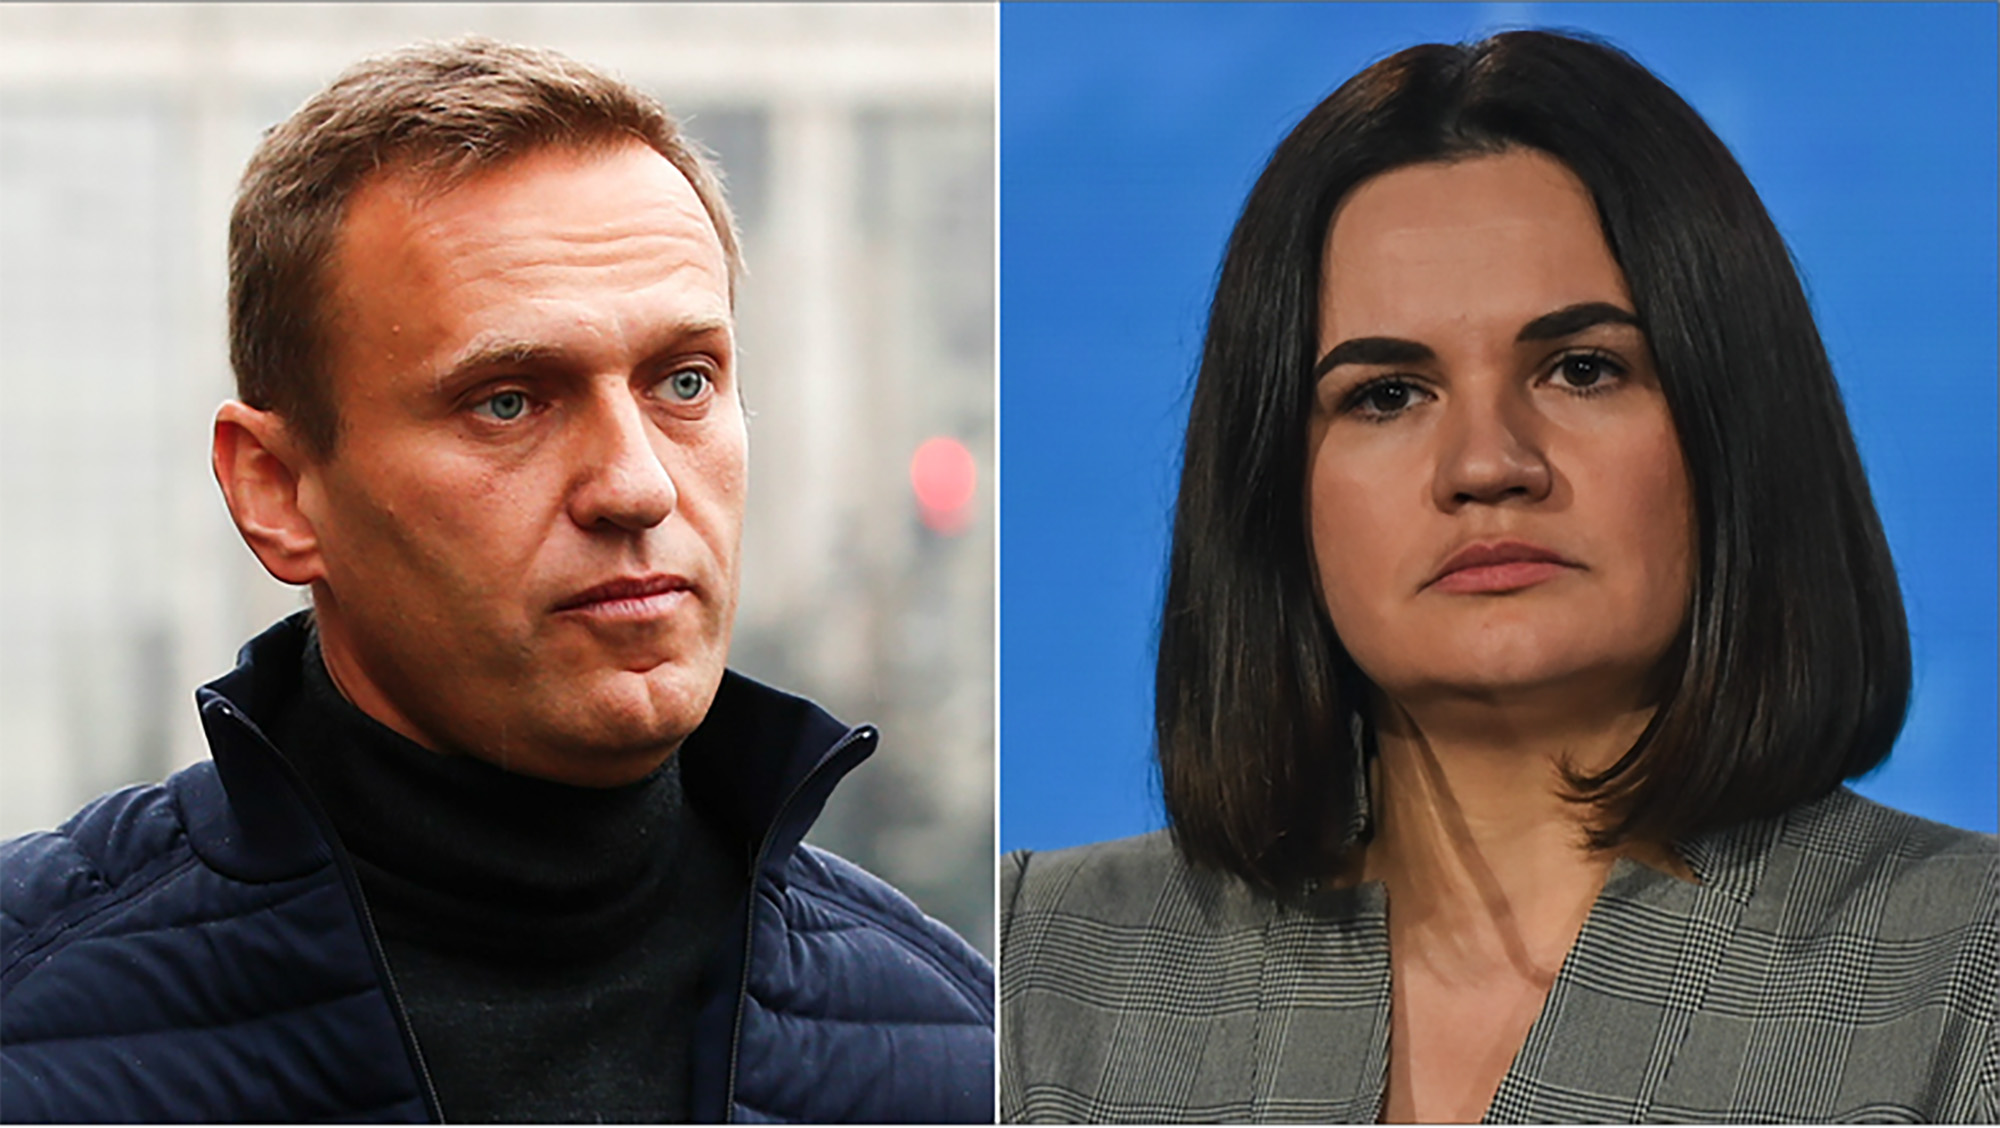 Russian opposition leader Alexei Navalny, left, and exiled leader of the opposition in Belarus, Sviatlana Tsikhanouskaya are seen in recent photos.